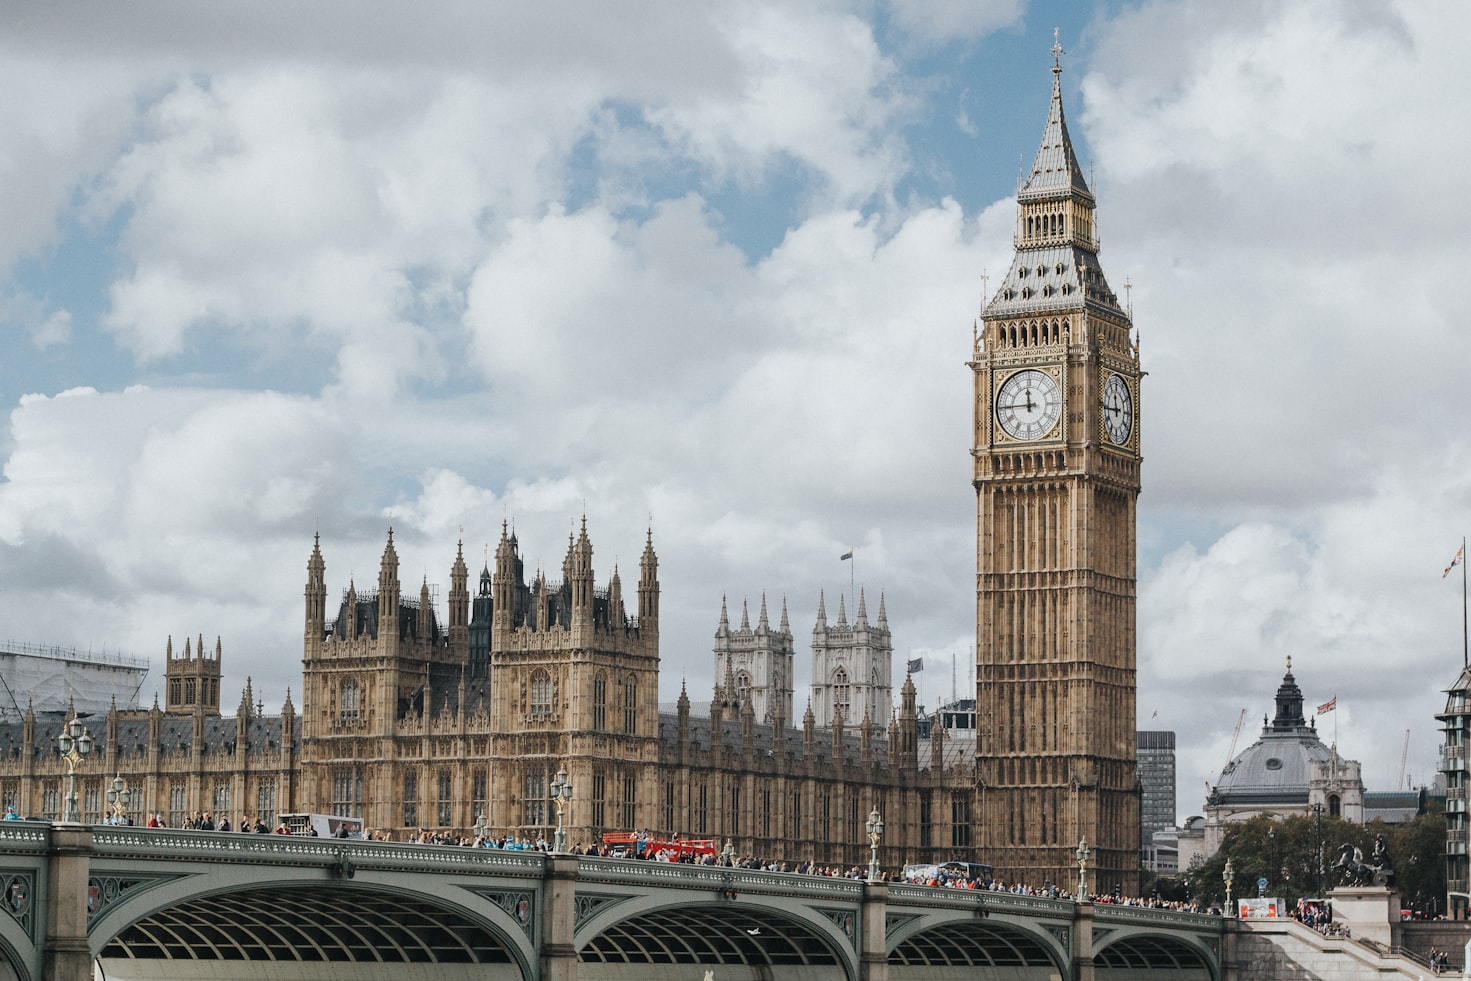 The Big Ben is not the name of the clock tower